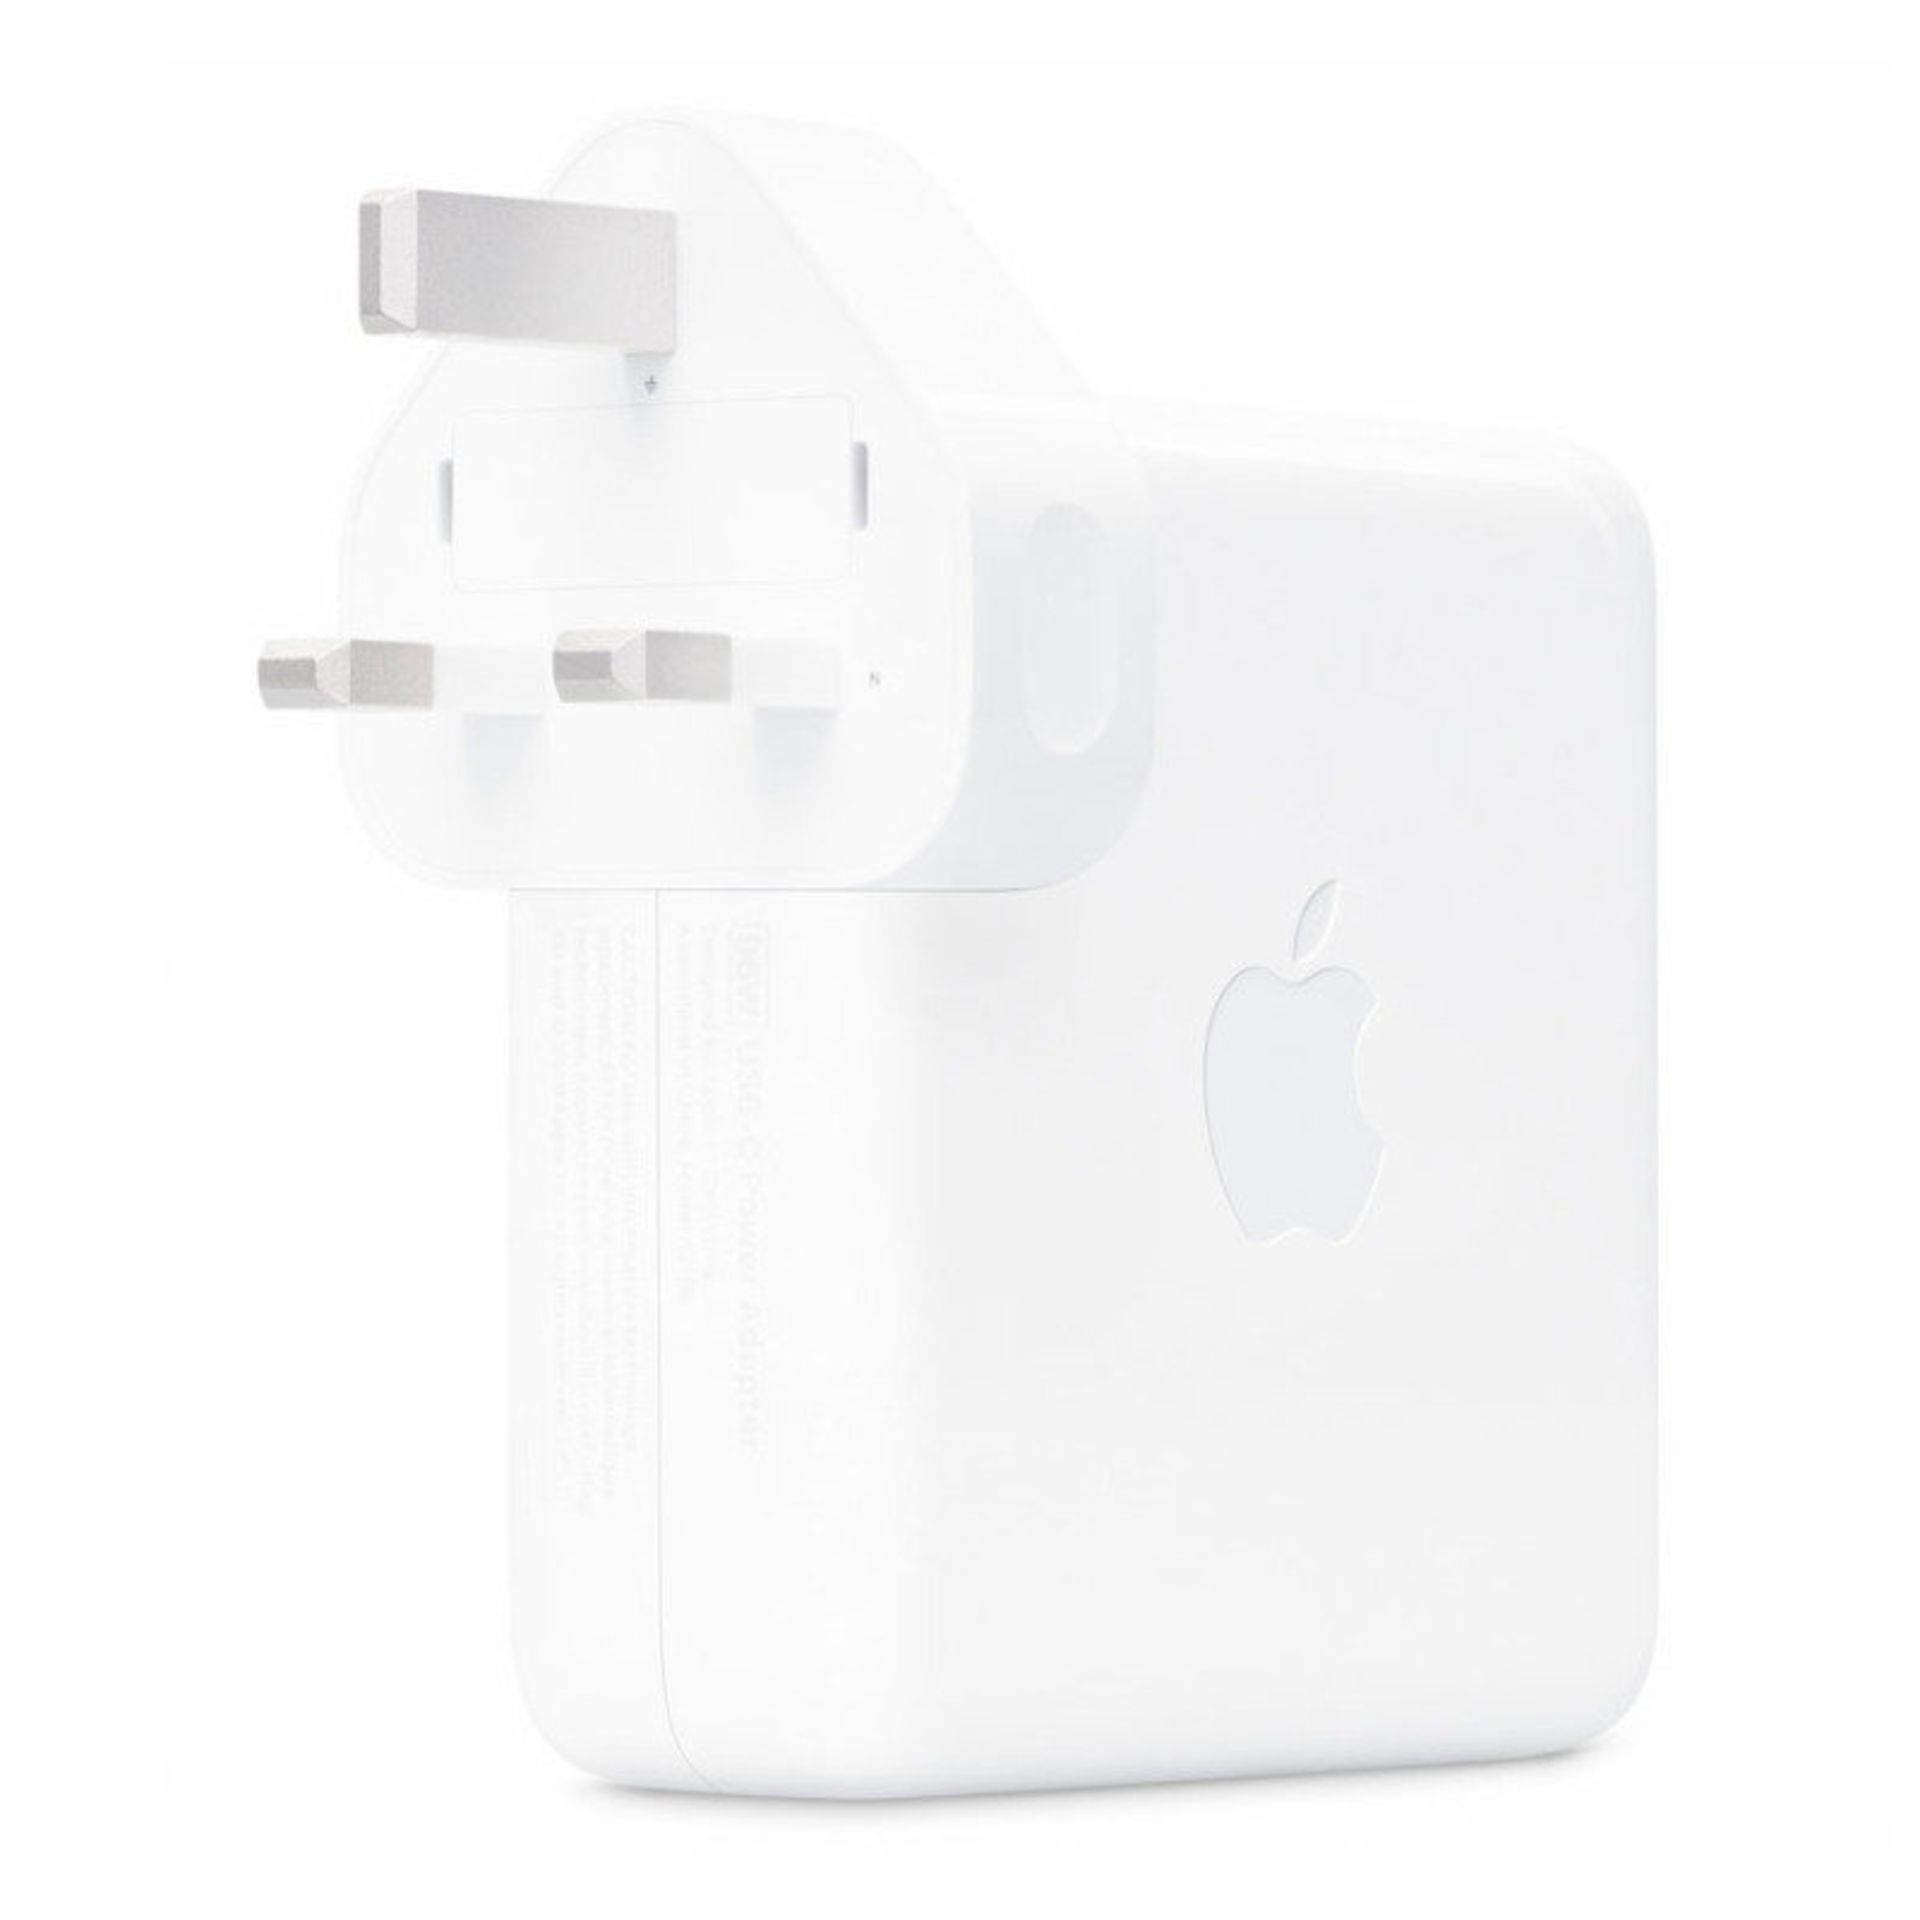 BRAND NEW FACTORY SEALED APPLE USB-C 96w Power Adaptor. RRP £79.99. The 96W USB-C Power Adapter - Image 2 of 3